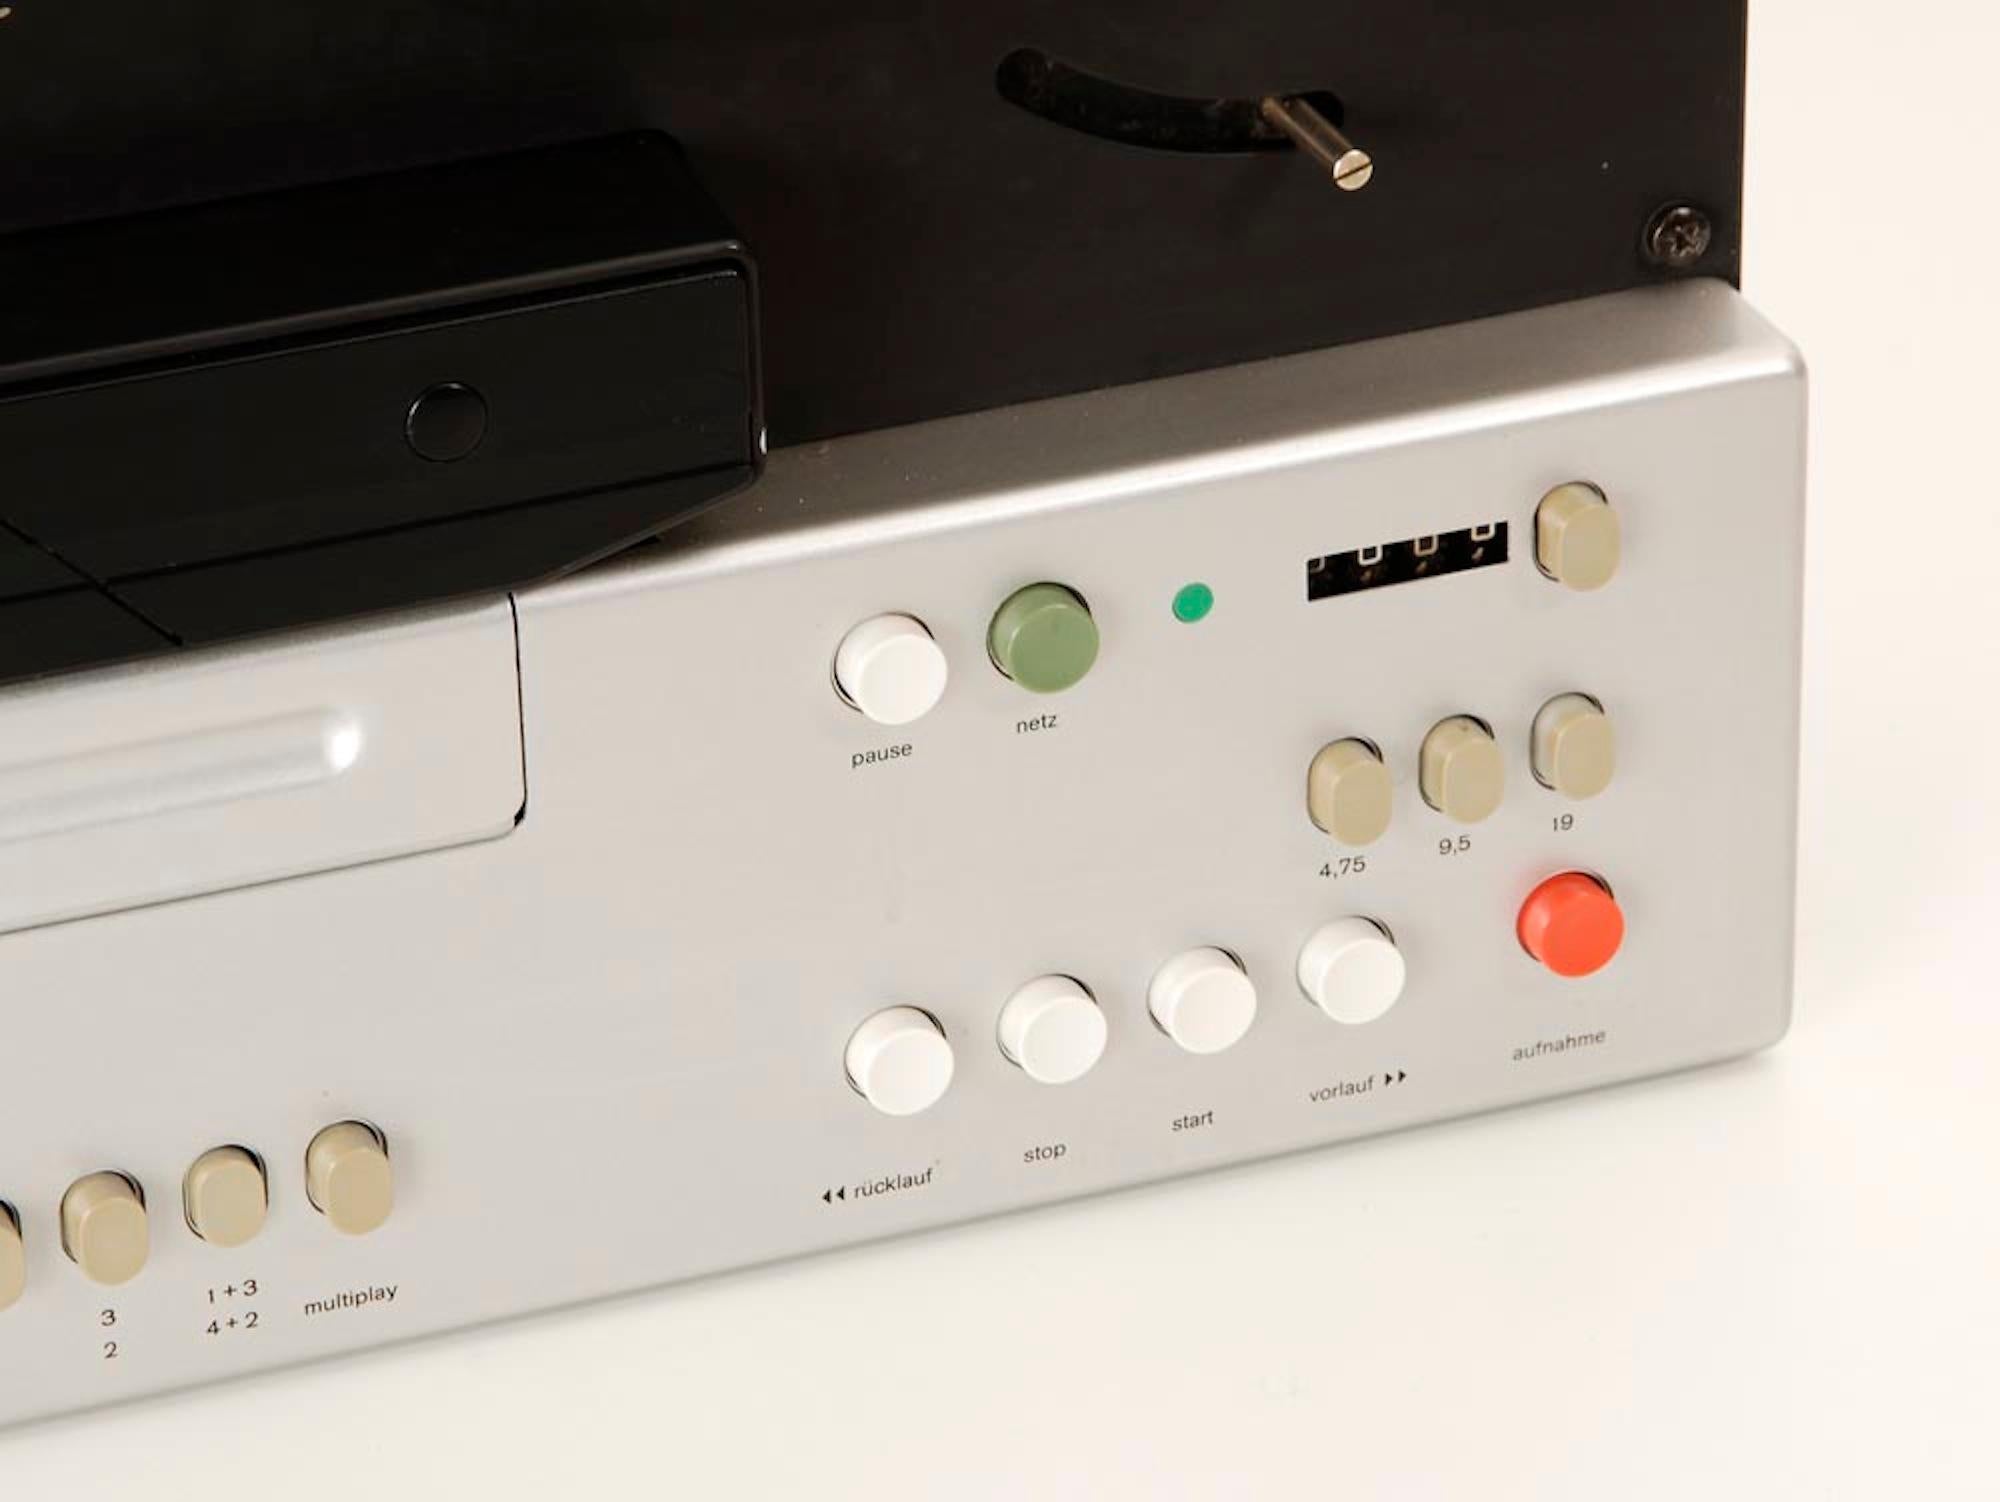 Reel to Reel TG1000 tape recorder by Dieter Rams for Braun, 1974.
Silver finish, 4-lane, speeds 4,75 / 9,5 + 19 cm / s, 3 heads, 3 motors, max. 22 he coil size. With microphone and headphone connections.

Specifications
Track system: 4-track,